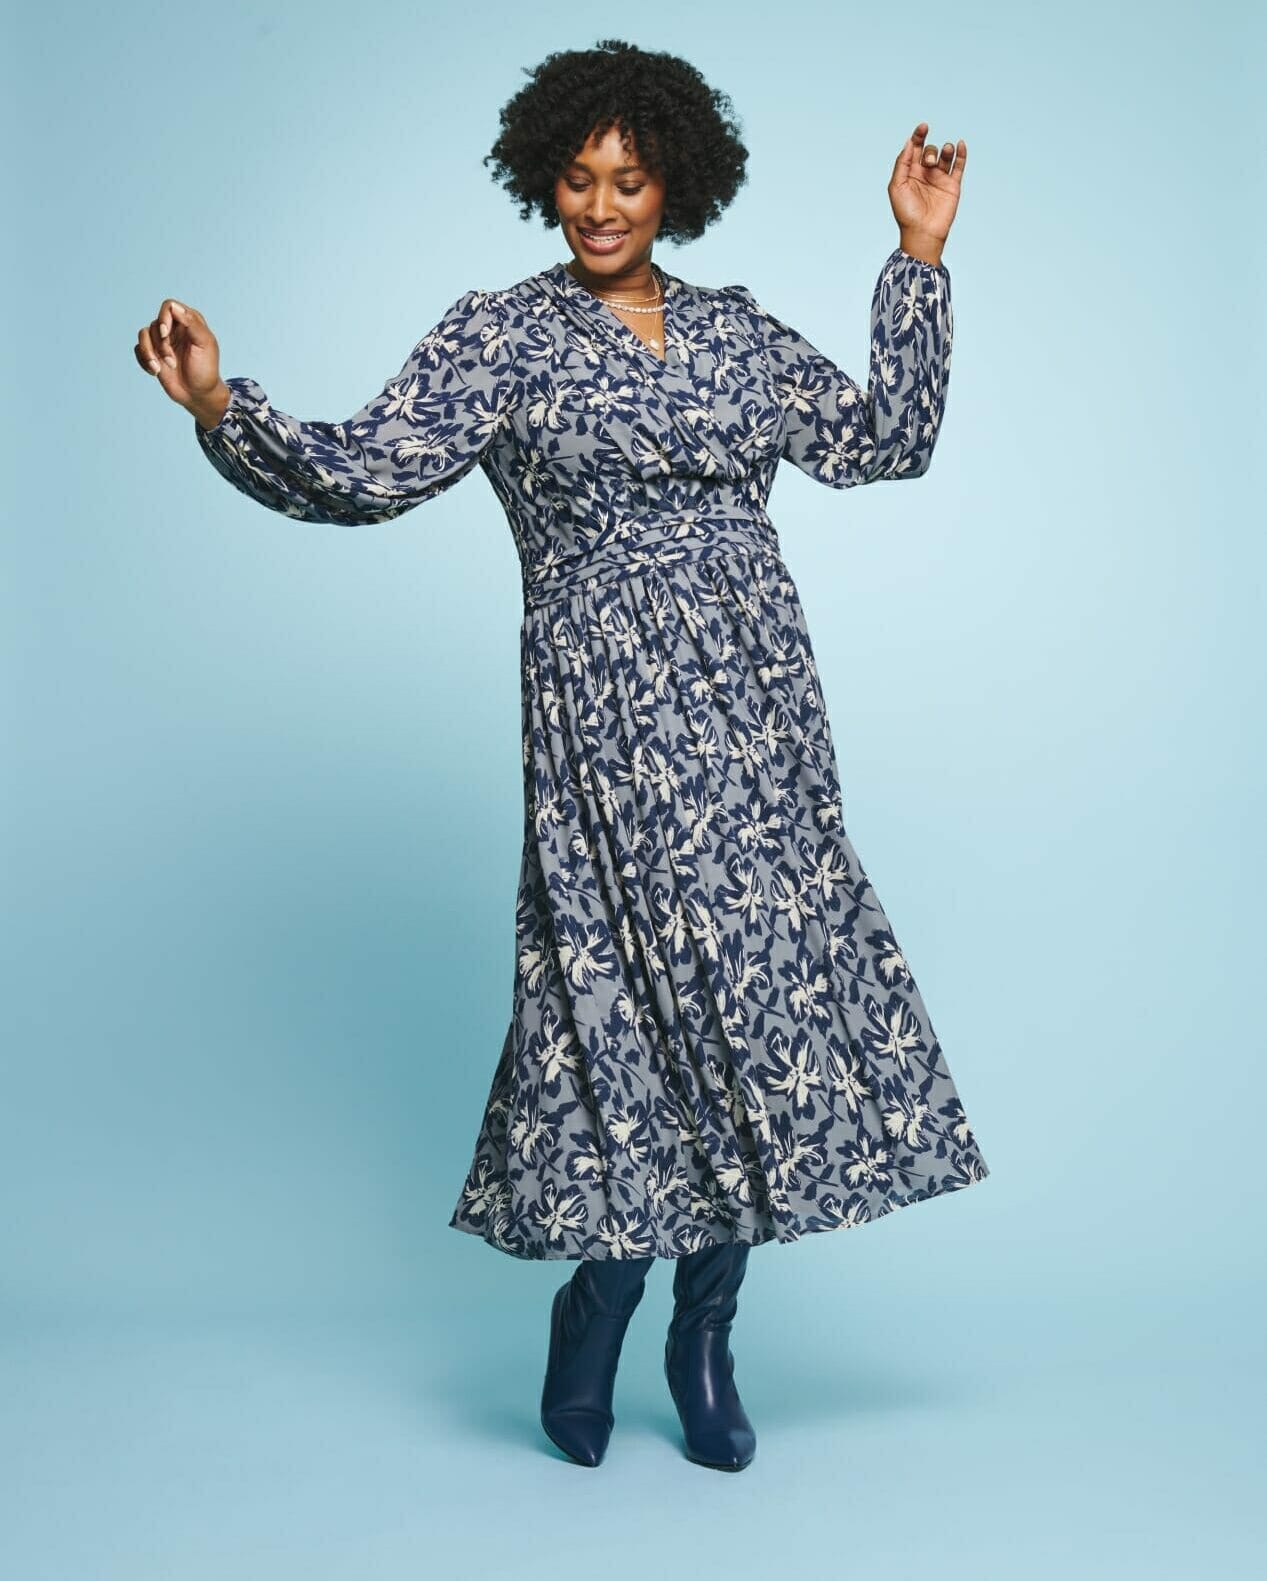 plus size model wearing a floral blue dress with boots.